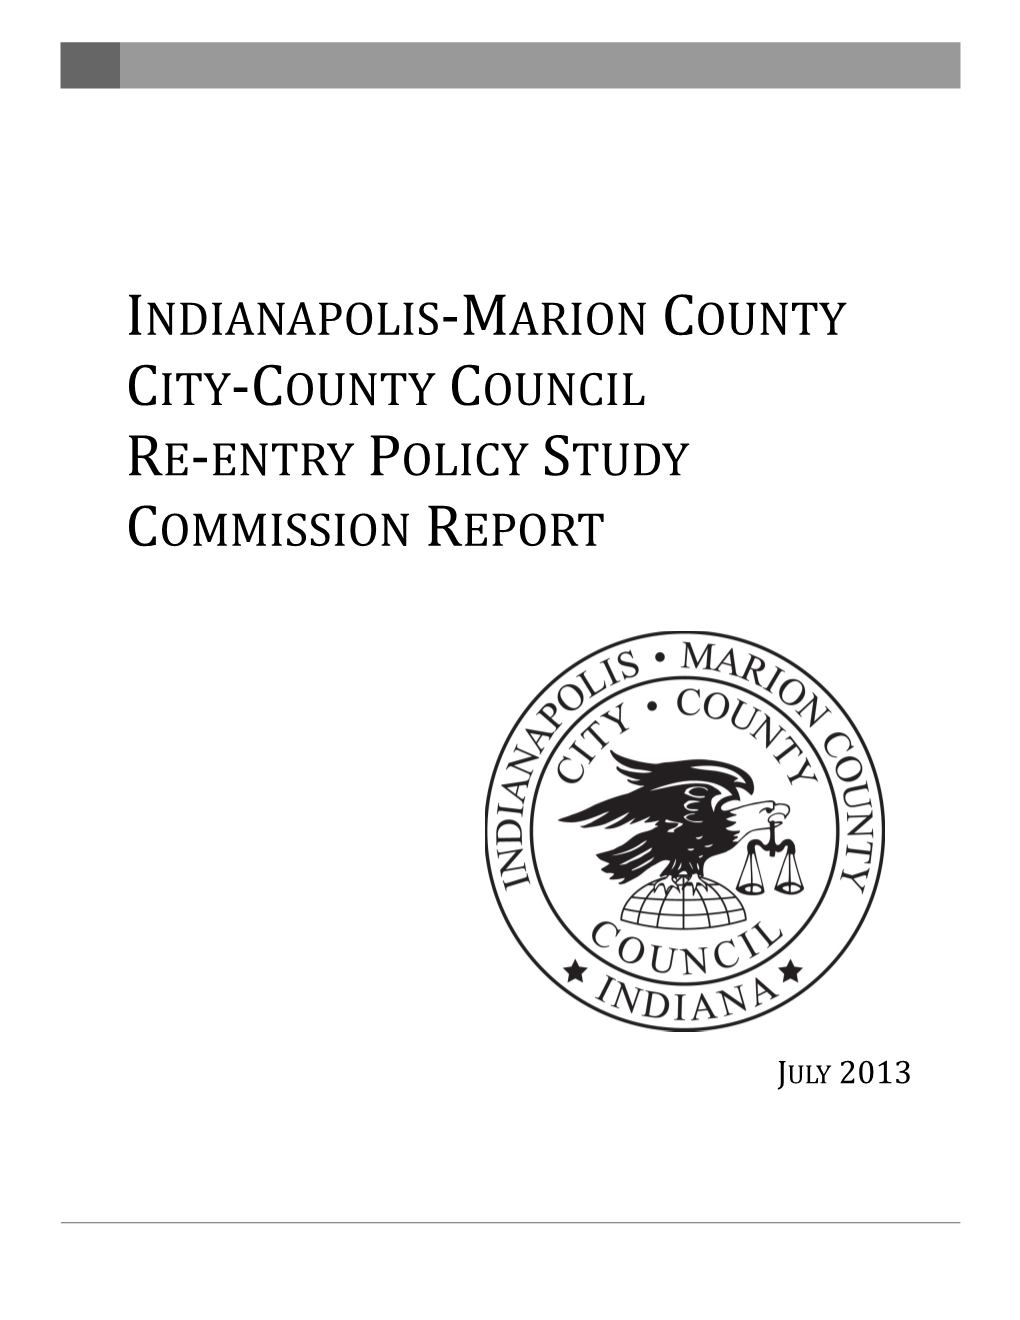 Indianapolis-Marion County City-County Council Re-Entry Policy Study Commission Report